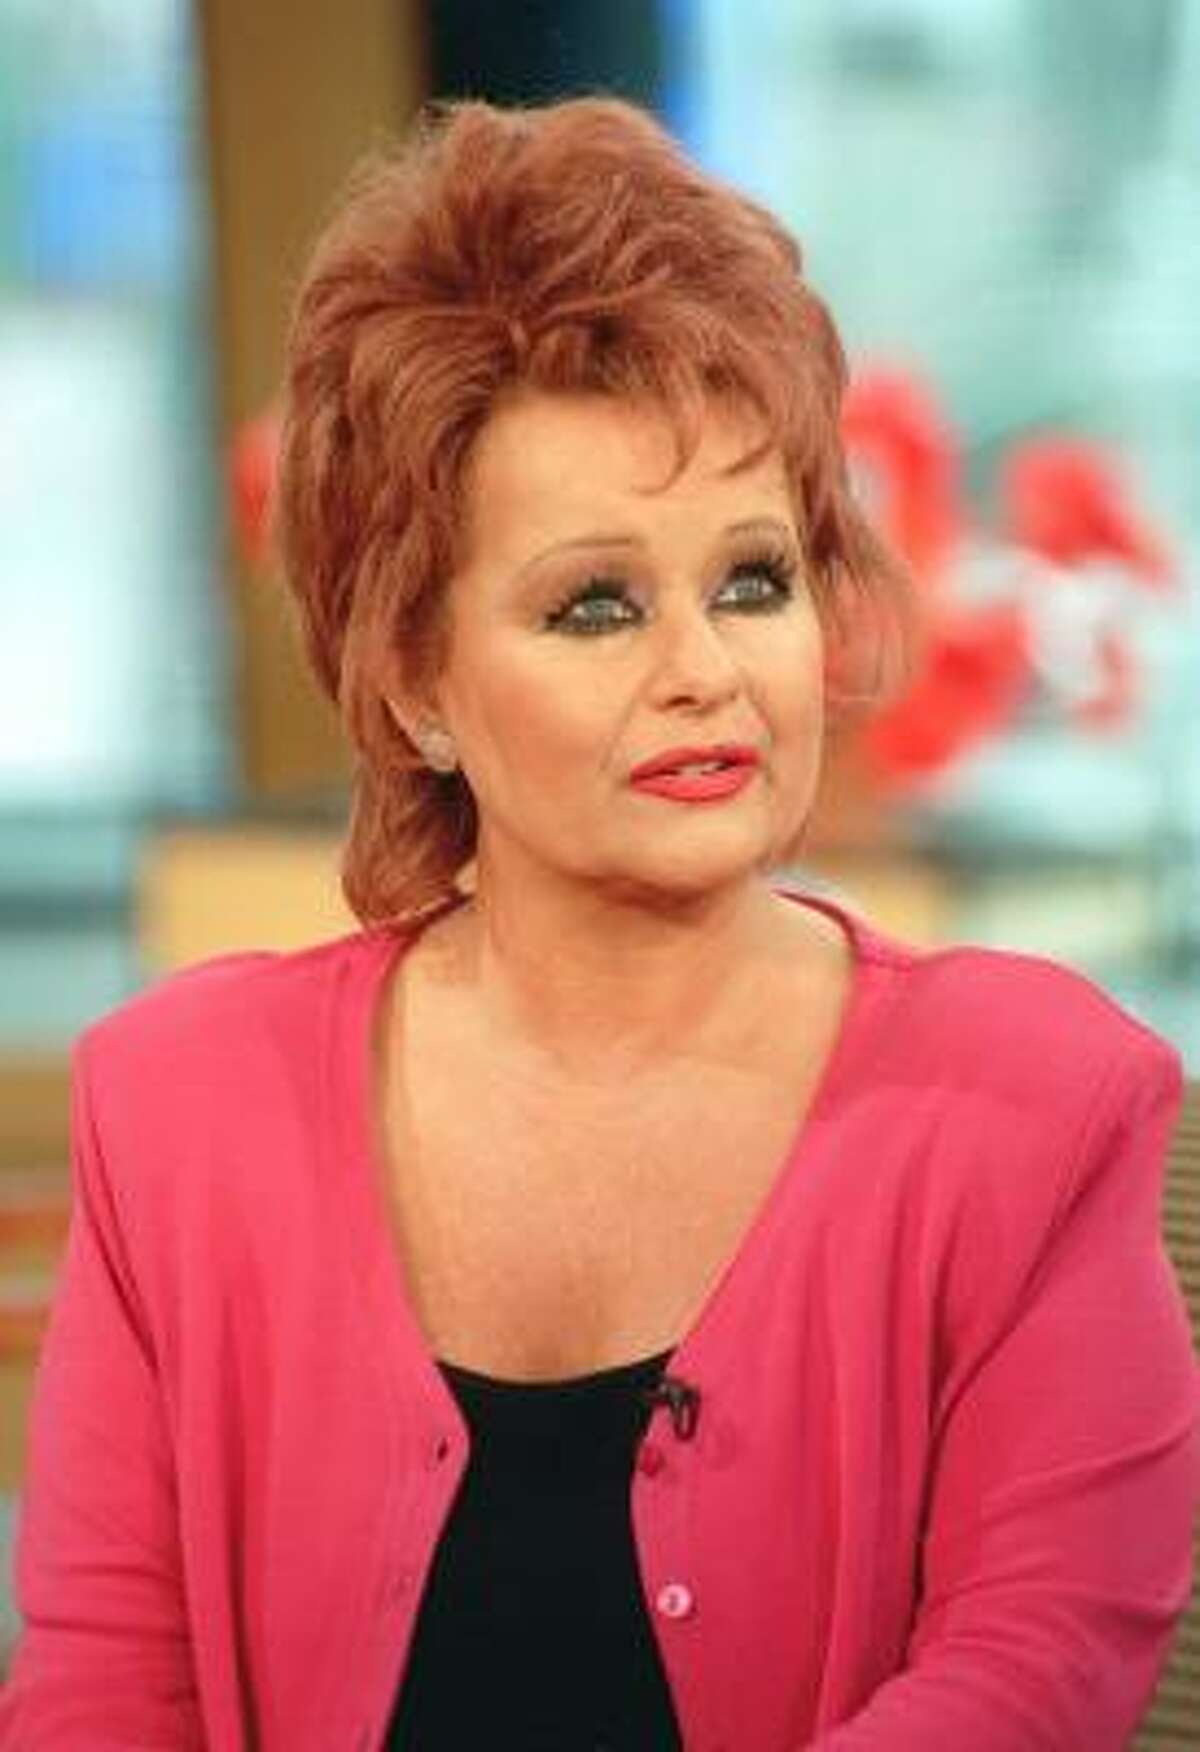 Are you ready for Jessica Chastain as Tammy Faye?